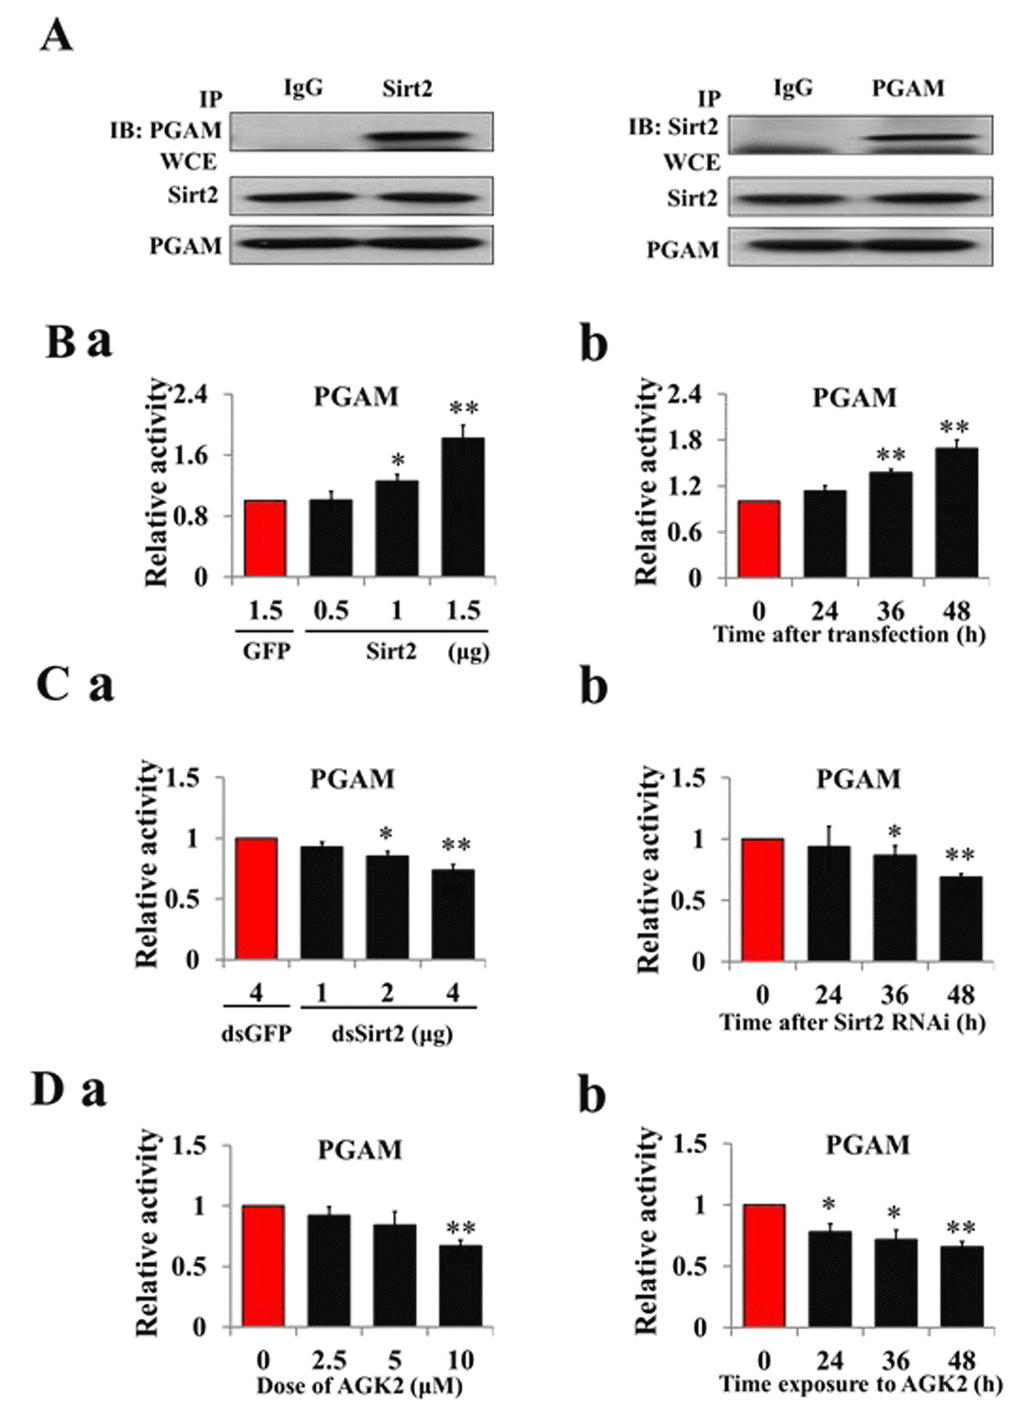 Sirt2 interacts with and increases PGAM activity. (A) Sirt2 physically associates with PGAM. HzAm1 cells were co-transfected with GFP-Sirt2 and GFP-PGAM-V5 plasmids for 48 h, and then the cell extracts were immunoprecipitated (IP) with anti-V5 or anti-Sirt2 antibody, followed by immunoblotting (IB) with an anti-Sirt2 or anti-V5 antibody, respectively. WCE: whole cell extracts. (B) Sirt2 overexpression increases PGAM activity in vitro. (a) Dose-dependent response to Sirt2 overexpression. HzAm1 cells were transfected with GFP-Sirt2 or GFP-V5 plasmid for 48 h. (b) Time-dependent response to Sirt2 transfection. HzAm1 cells were transfected with 1.5 μg GFP-Sirt2 plasmid. (C) Sirt2 knockdown decreases PGAM activity in vitro. (a) Dose-dependent response to Sirt2 RNAi. HzAm1 cells were transfected with Sirt2 dsRNA or GFP dsRNA for 48 h. (b) Time-dependent response to RNAi. HzAm1 cells were transfected with 4 μg Sirt2 dsRNA. (D) Effects of Sirt2 inhibitor AGK2 on PGAM activity. (a) Dose-dependent response to AGK2 treatment. HzAm1 cells were cultured with AGK2 for 48 h. (b) Time-dependent response to AGK2 treatment. HzAm1 cells were cultured with 10 μM AGK2. Enzyme activity was measured and normalized against total protein levels. Each point represents the means±S.D. of three independent replicates. *, p